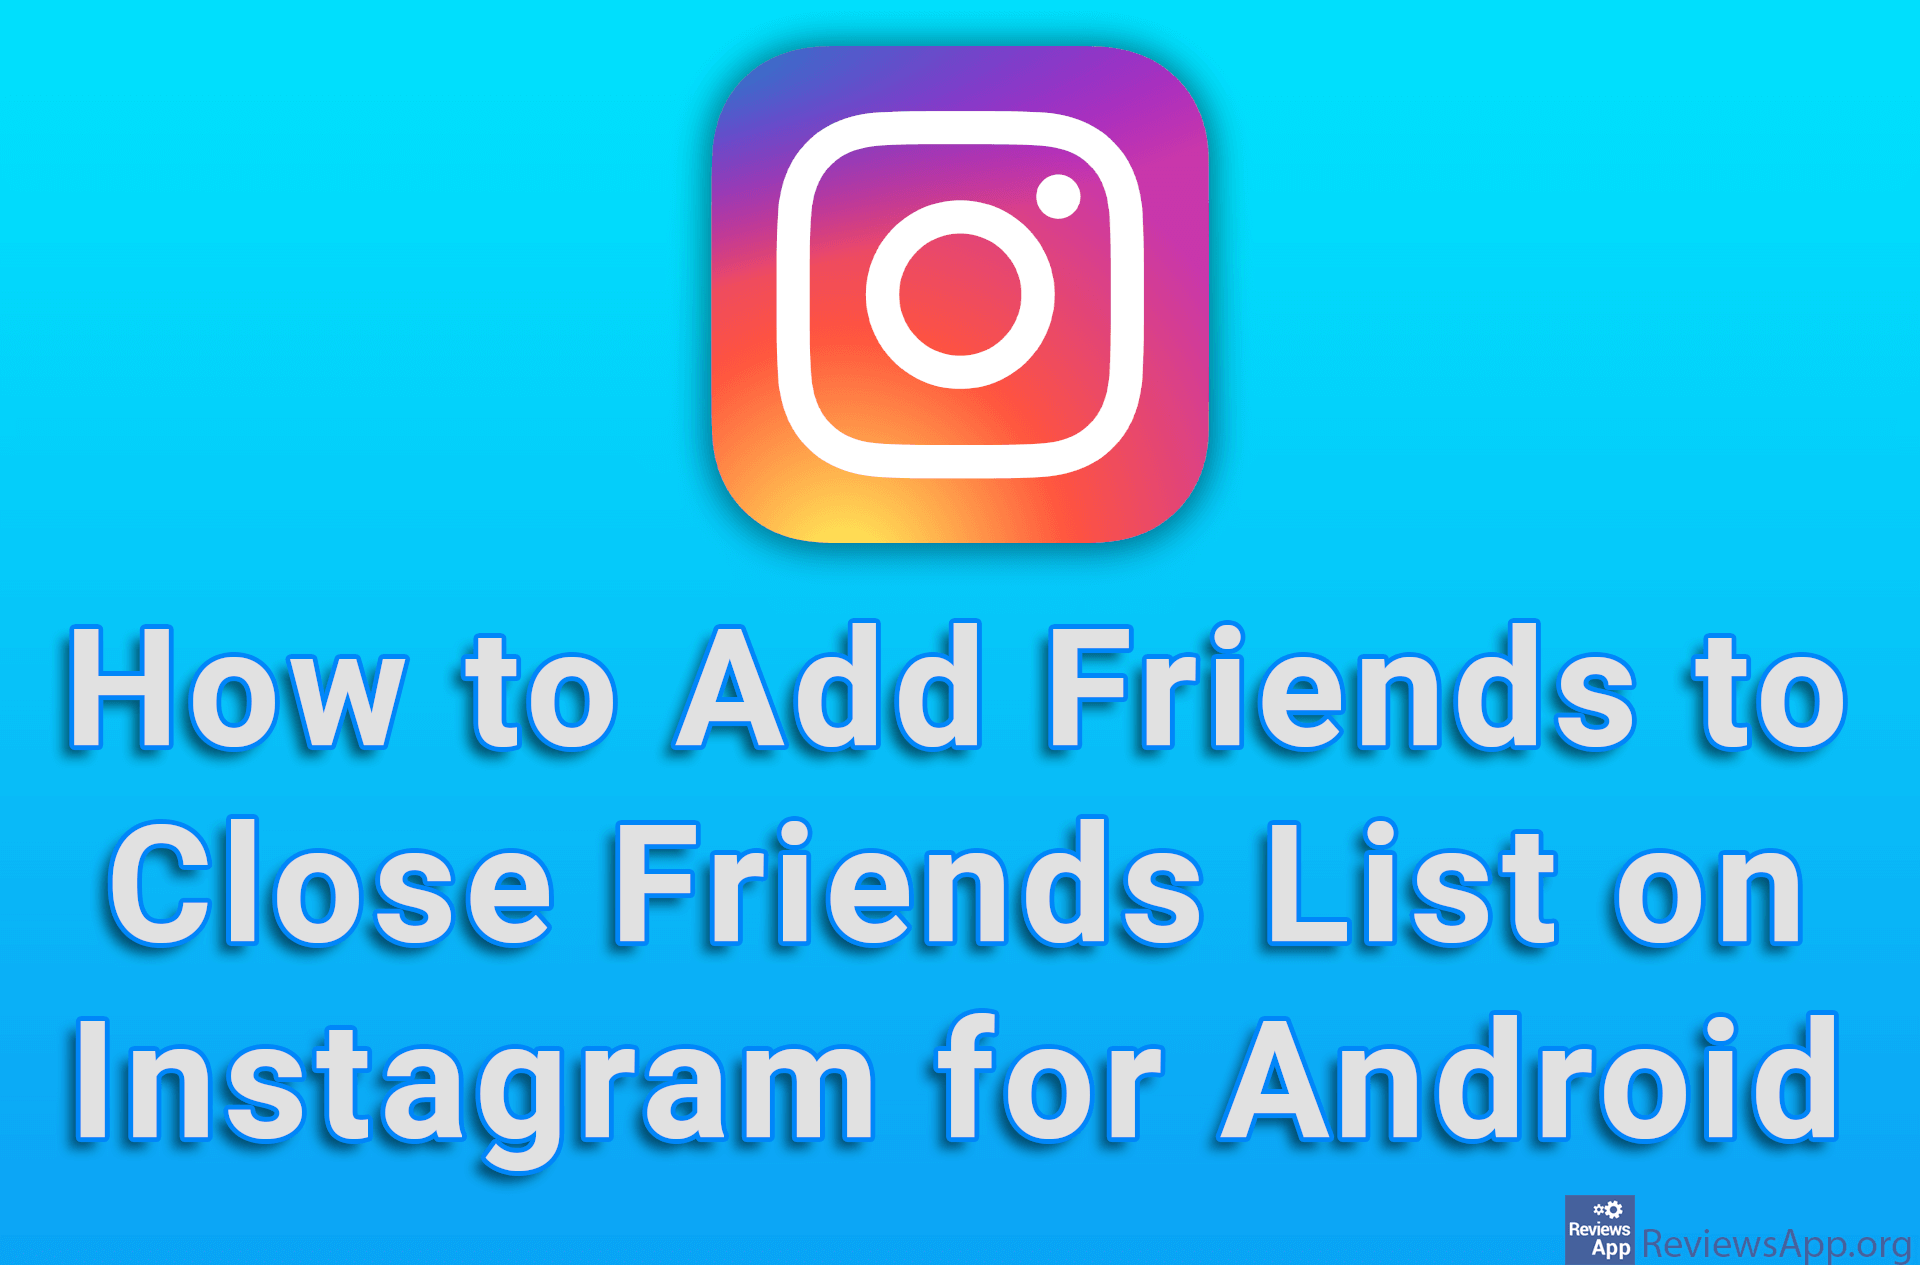 How to Add Friends to Close Friends List on Instagram for Android